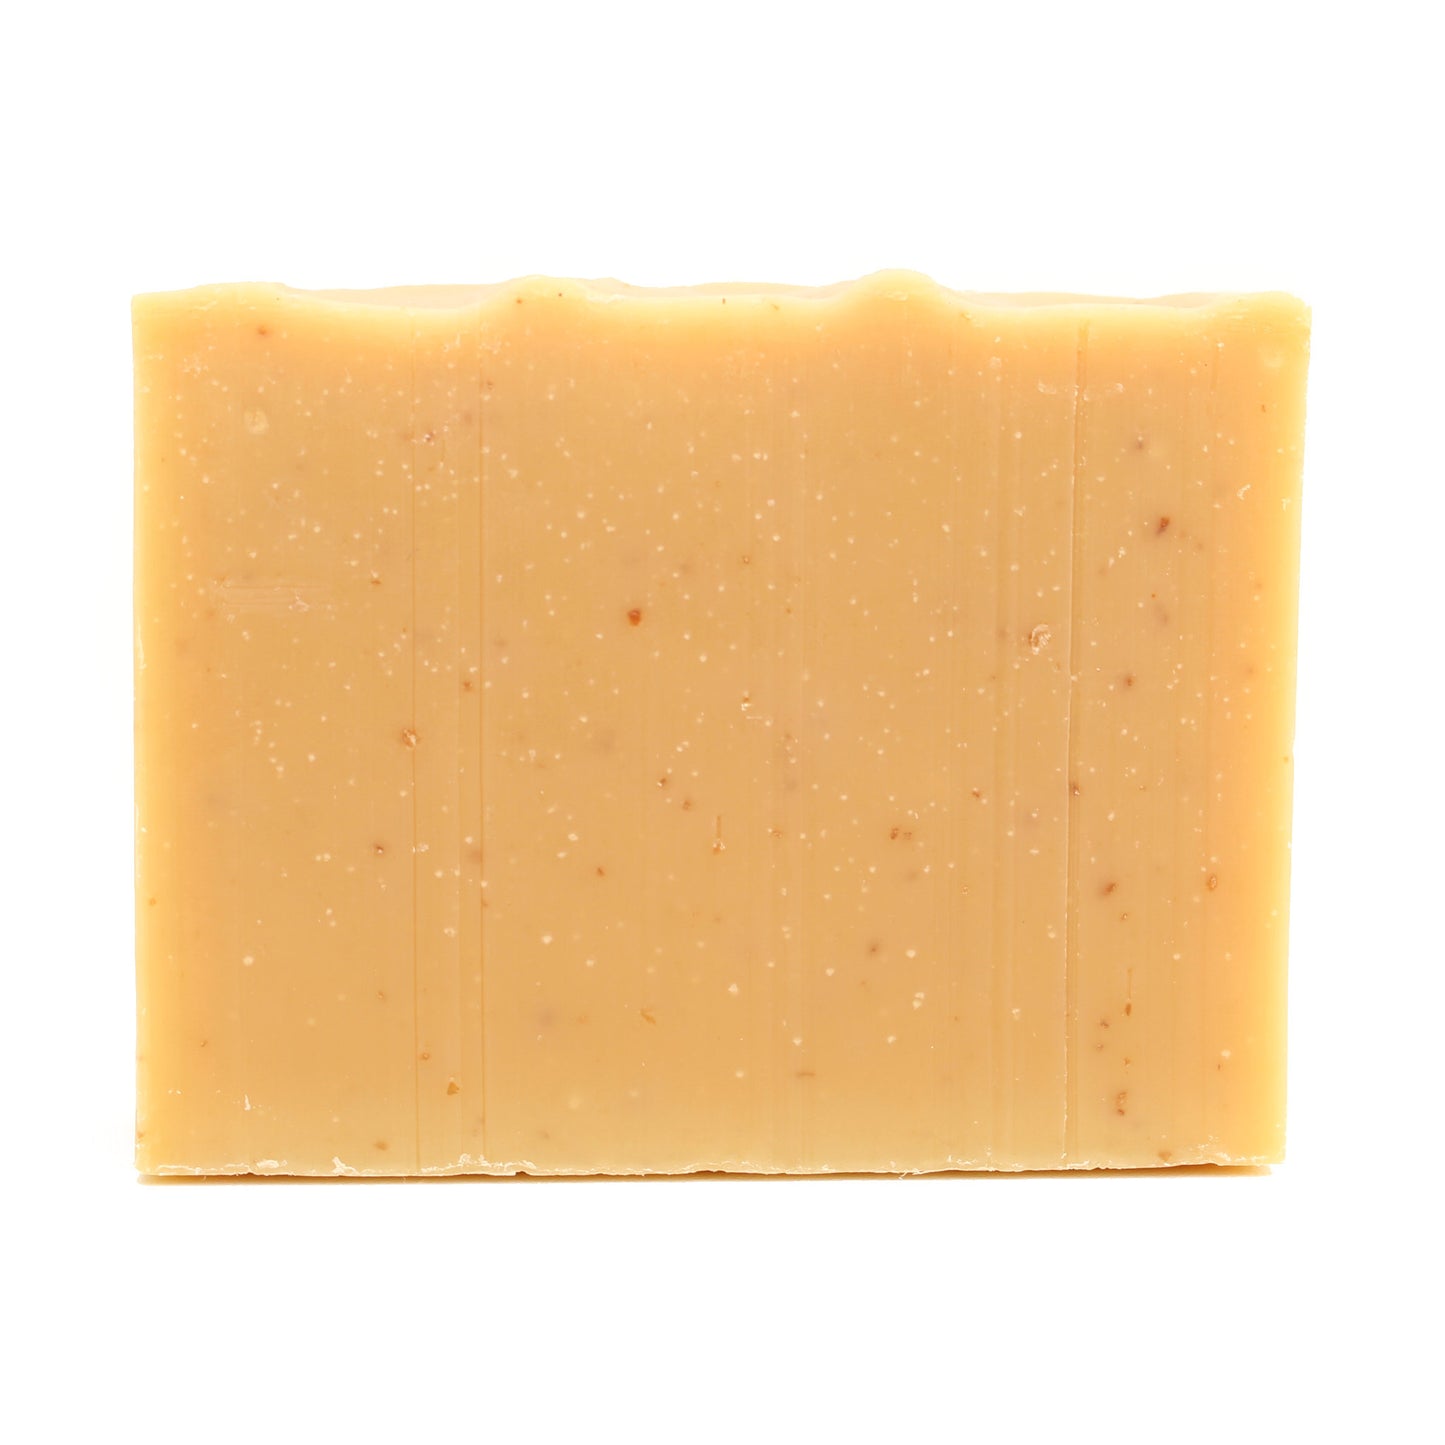 A naked bar of Lemme Bee Your Honey lemon essential oil and honey organic bar soap from Ground Soap.